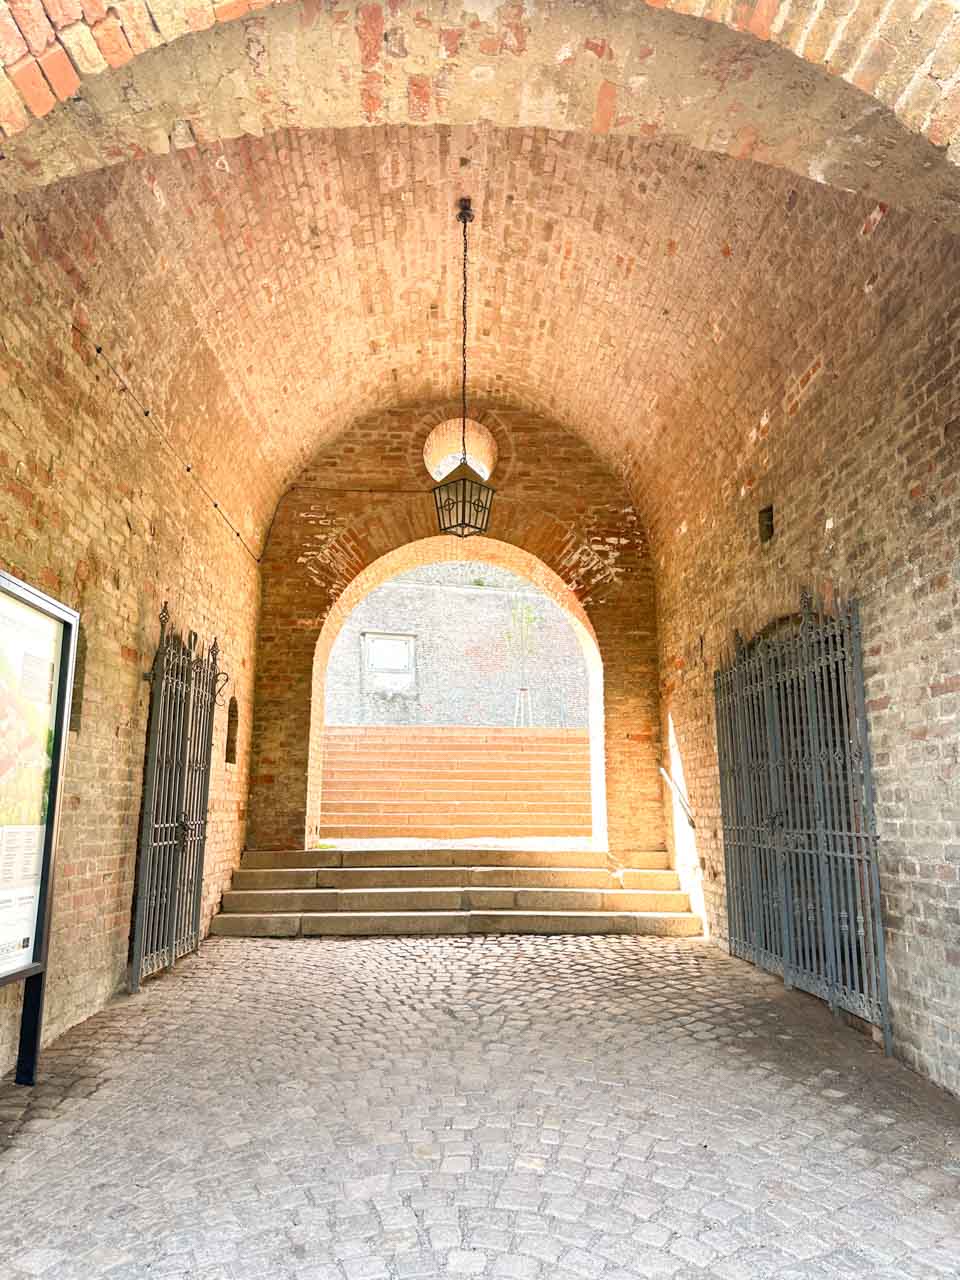 An old brick archway with iron gates and a hanging lantern in a courtyard leading to Špilberk Castle in Brno